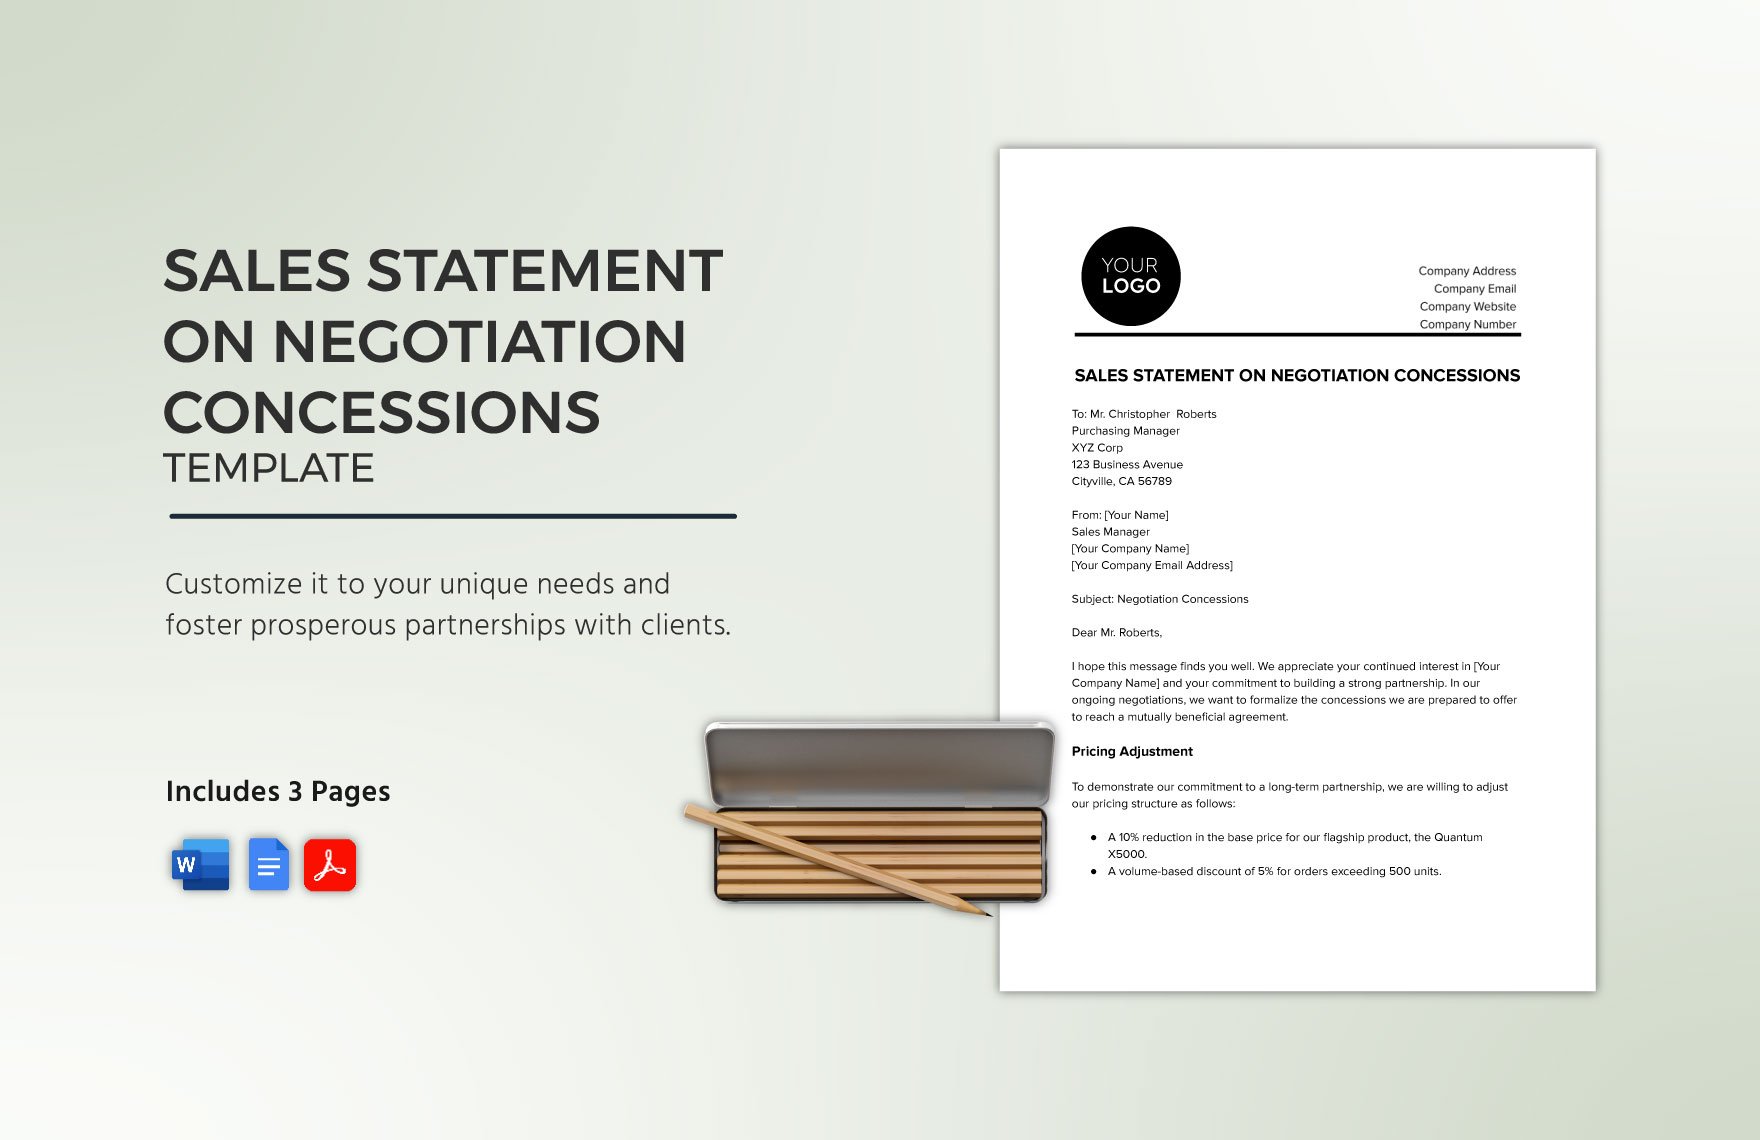 Sales Statement on Negotiation Concessions Template in Word, Google Docs, PDF